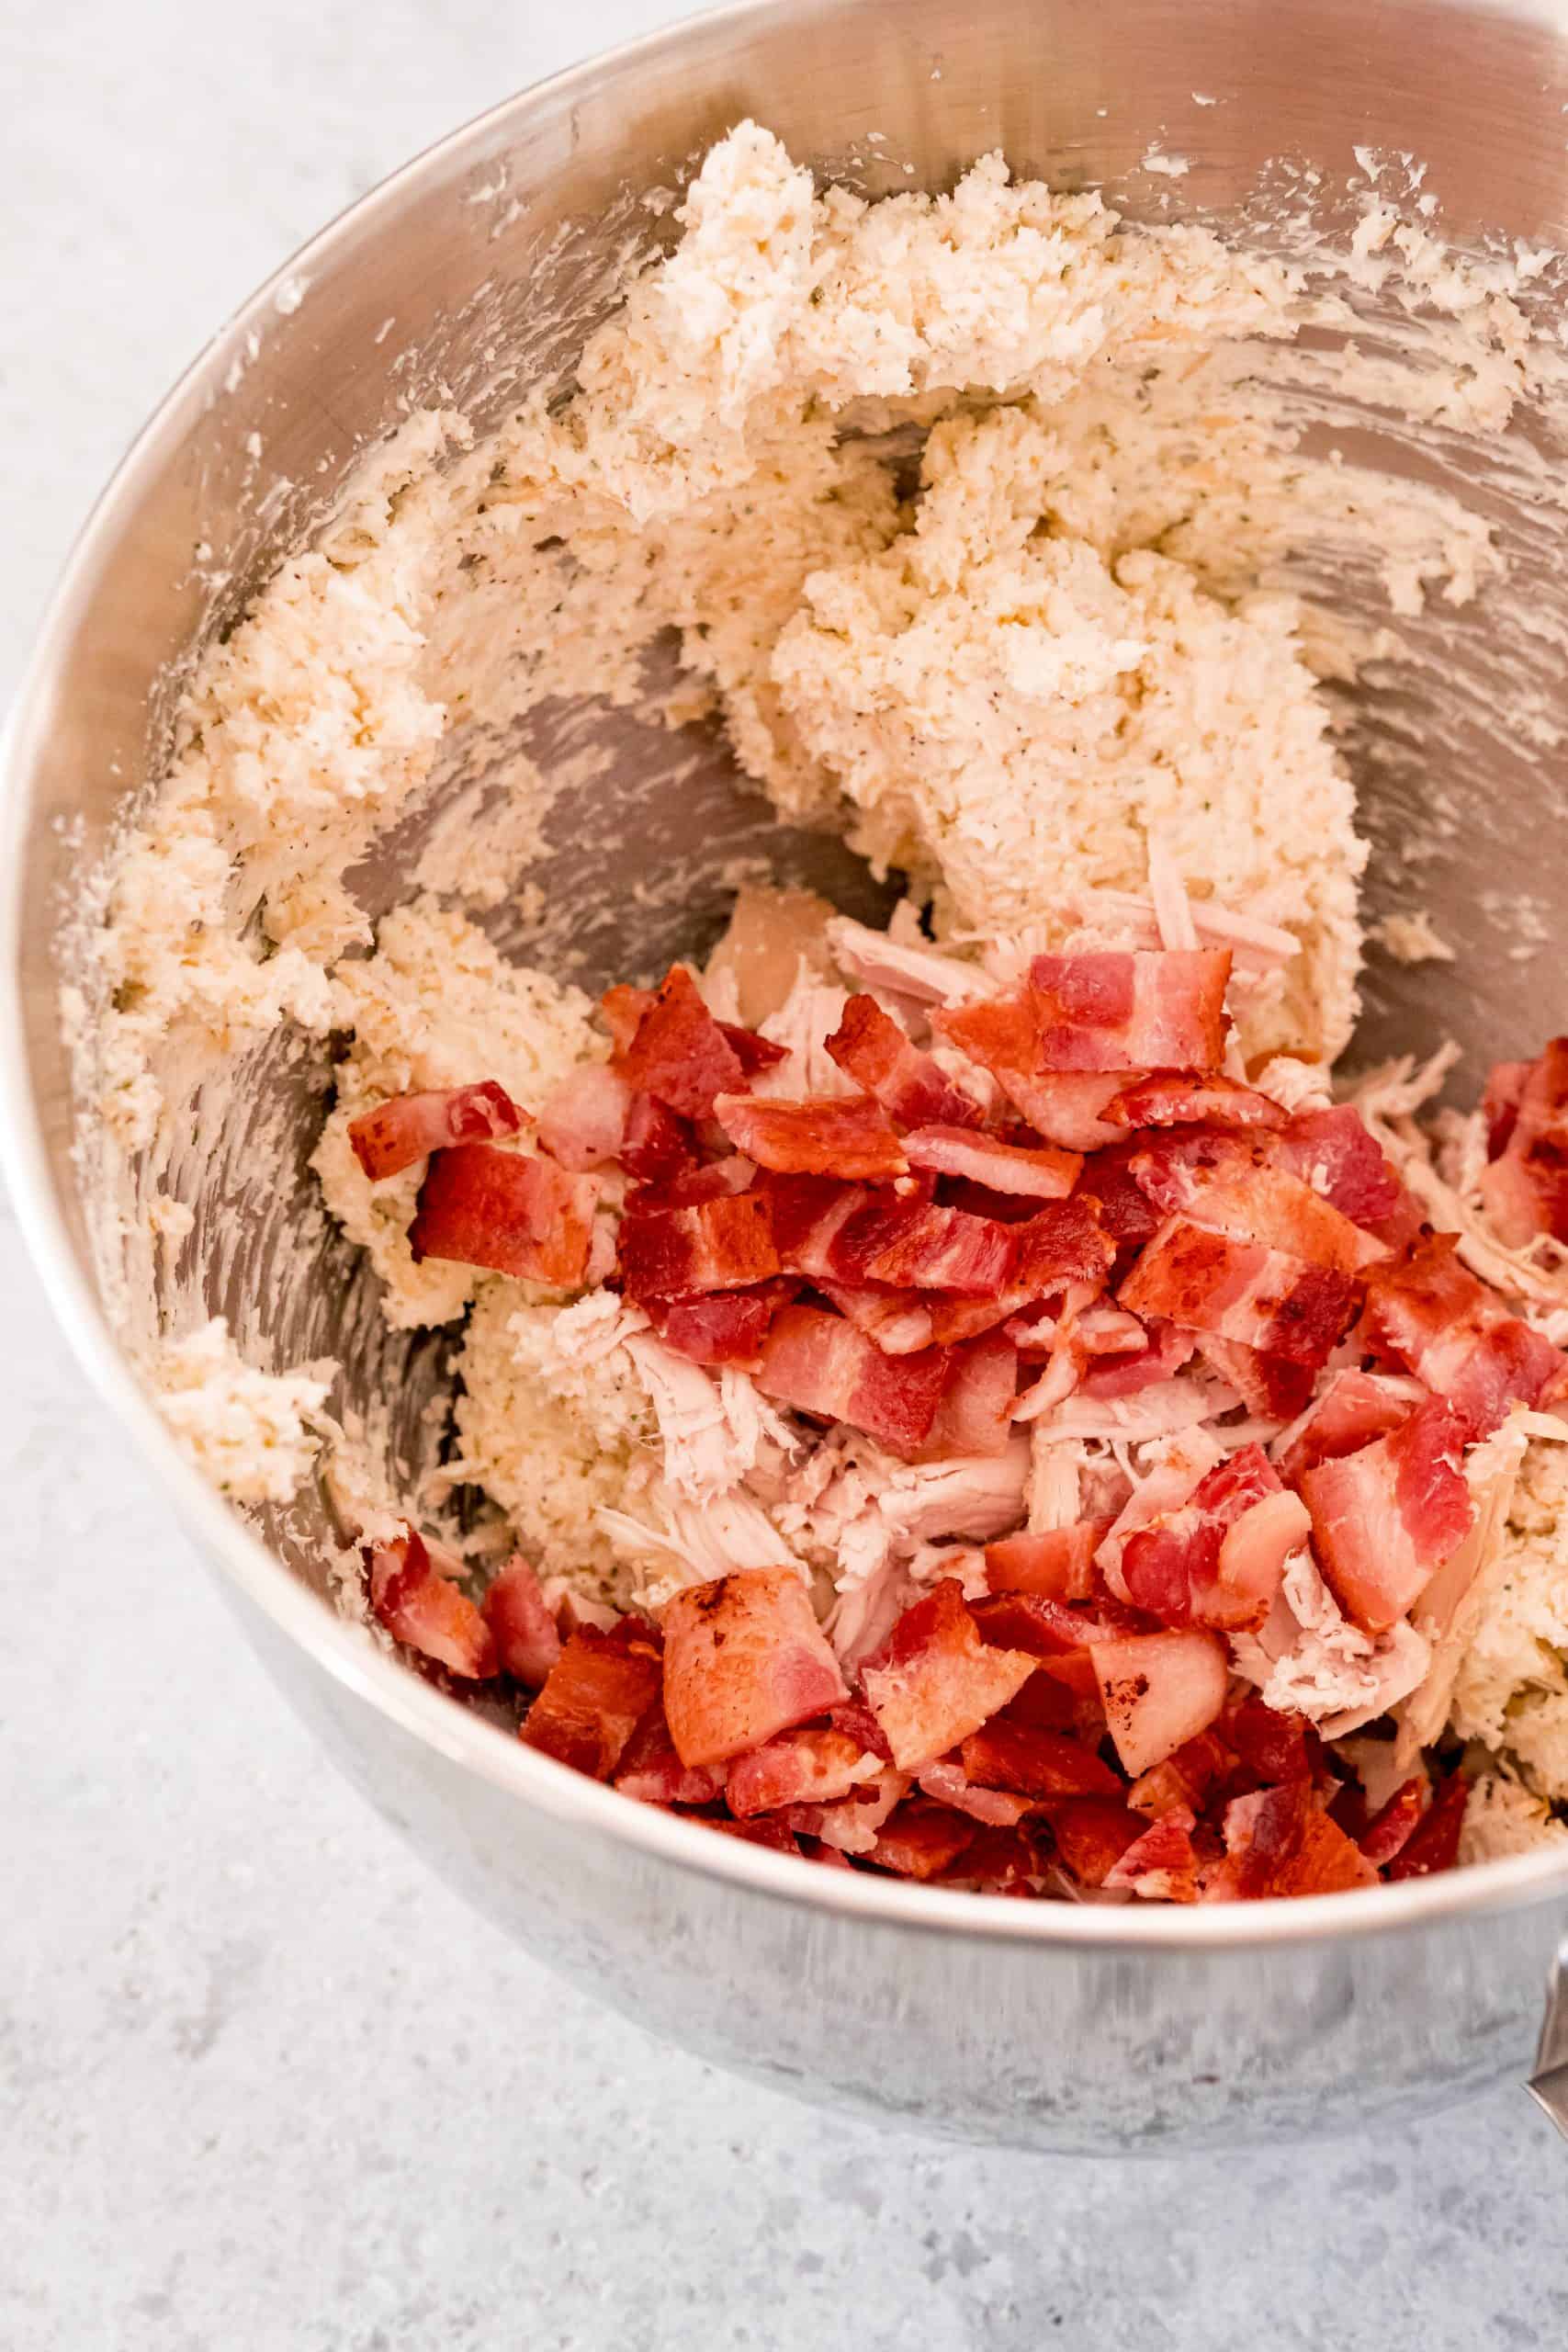 Bacon added to cream cheese, cheese and seasoning mixture.